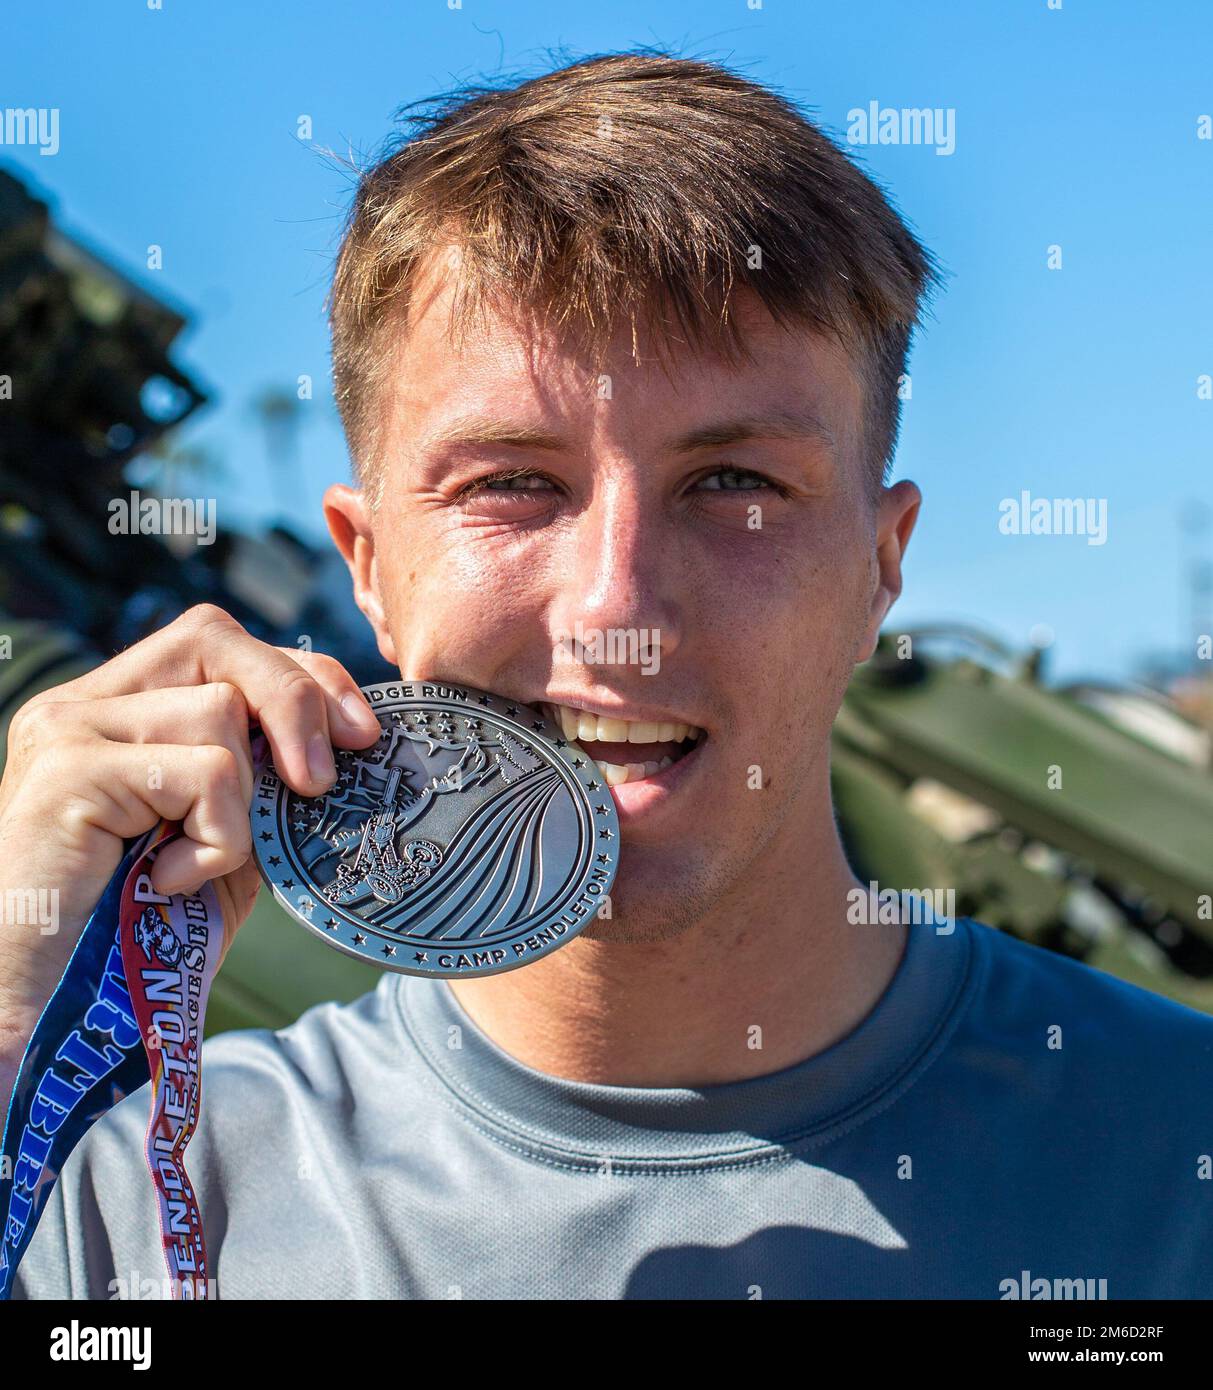 U.S. Marine Pvt. Zach Reinhard with 1st Supply Battalion, 1st Marine Logistics Group, shows his finisher medal for the 10-kilometer event during the Heartbreak Ridge Run at Las Pulgas parade deck on Marine Corps Base Camp Pendleton, California, April 23, 2022. The Heartbreak Ridge Run is part of the Marine Corps Community Services Camp Pendletons’ Hard Corps Race Series, which offers multiple different competitive races and family fitness events throughout the year explicitly for Camp Pendleton active duty service members, dependents, retirees, and other base patrons. Stock Photo